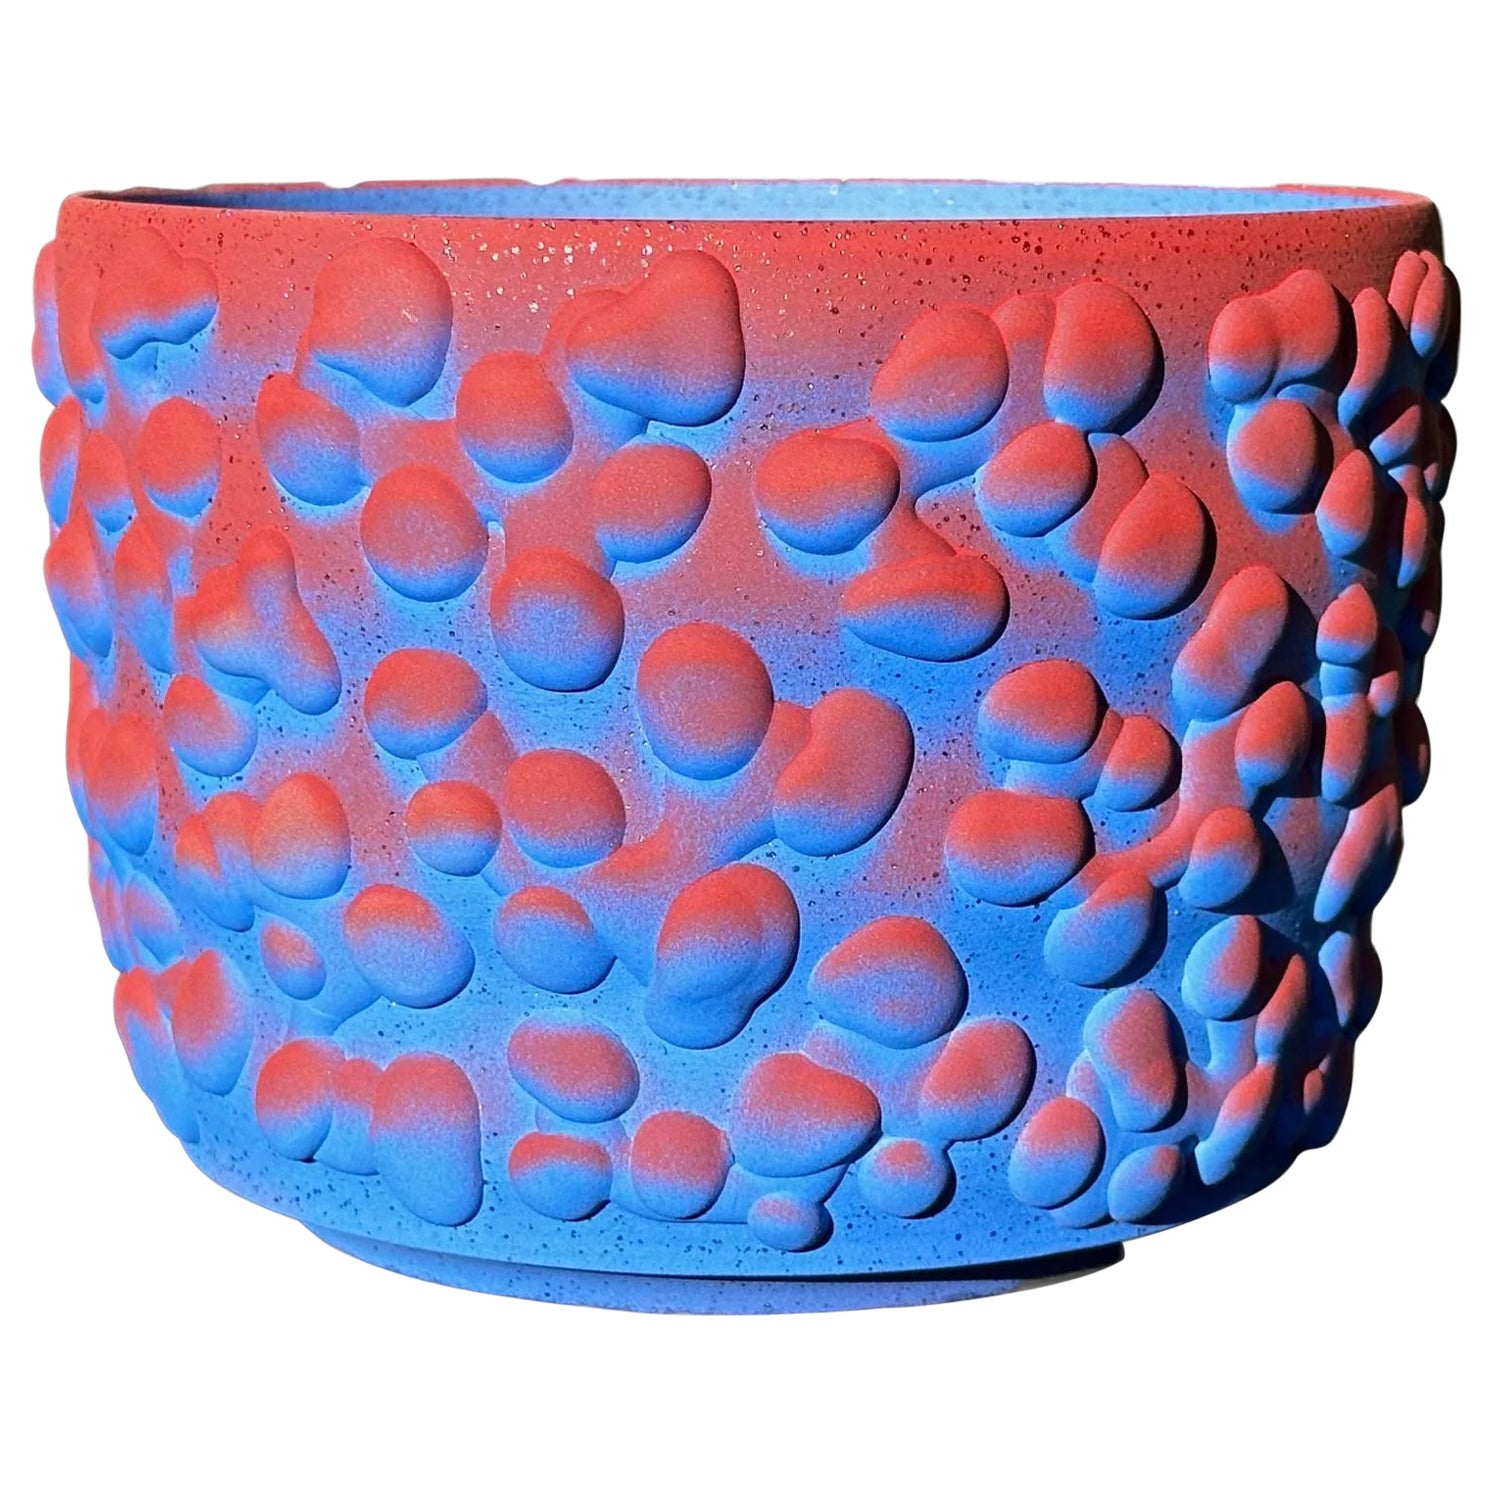 Cobalt And Cinnabar Organic Ombre Planter For Sale